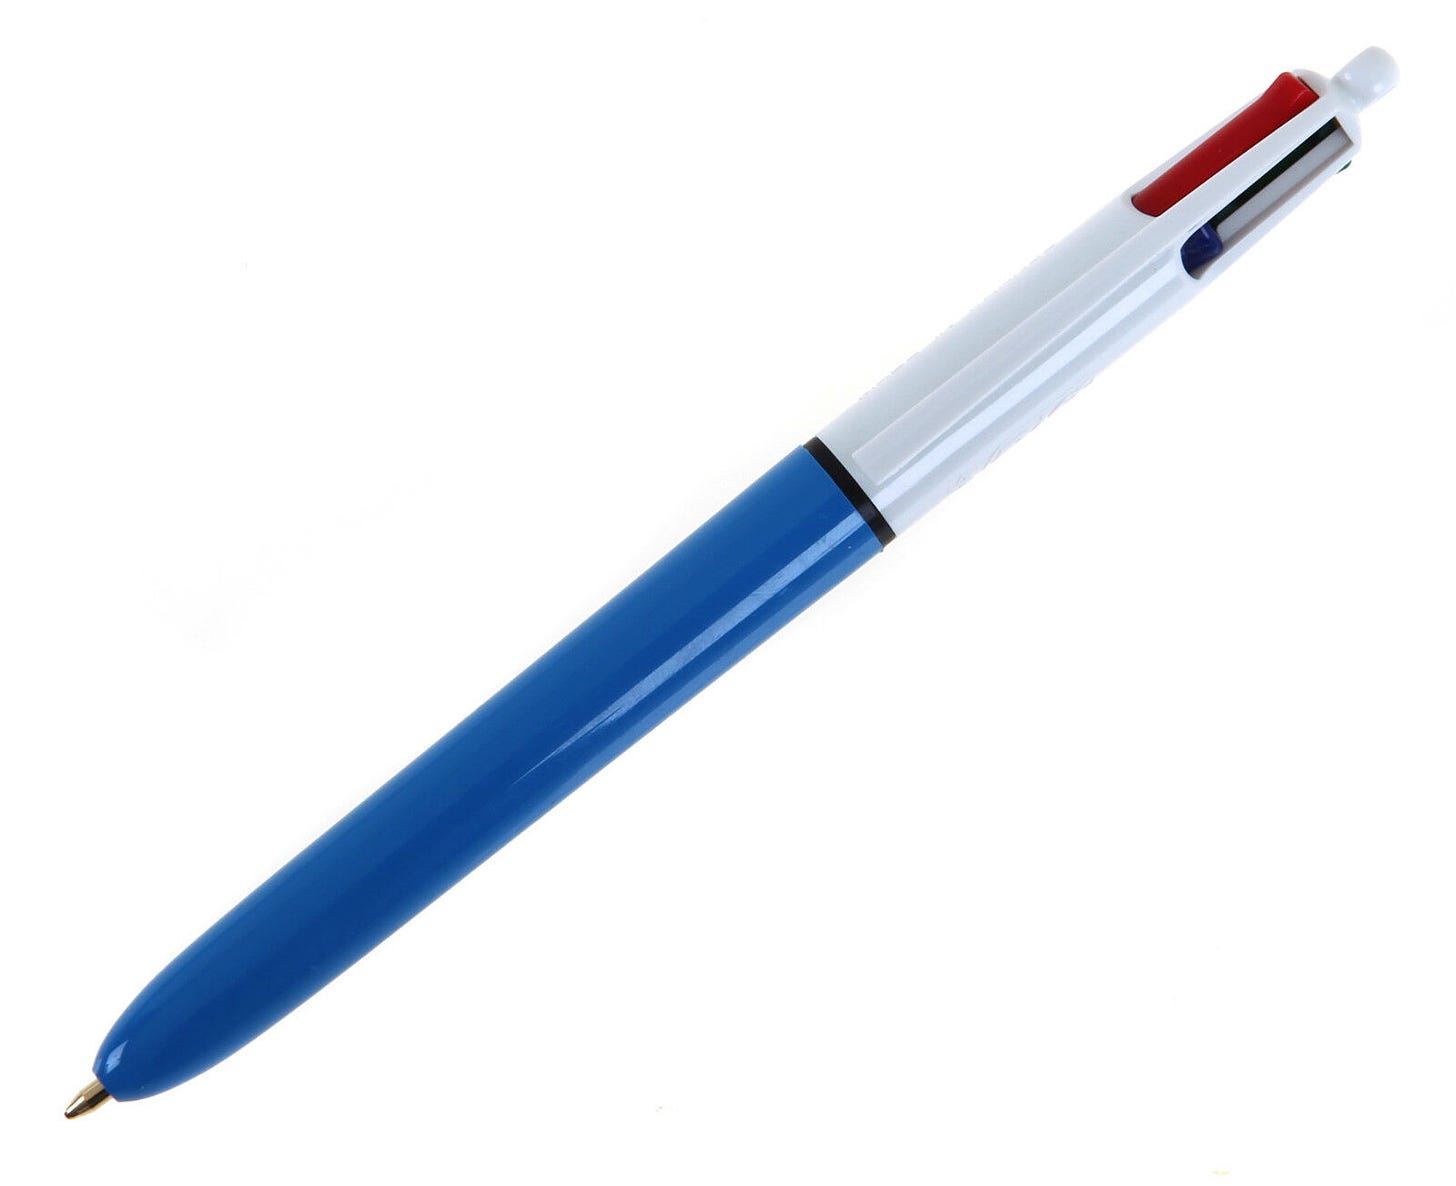 Bic 4 Colour Ball Point Pen with Medium Point ( Blue, Red, Green, Black, ) - Picture 1 of 1